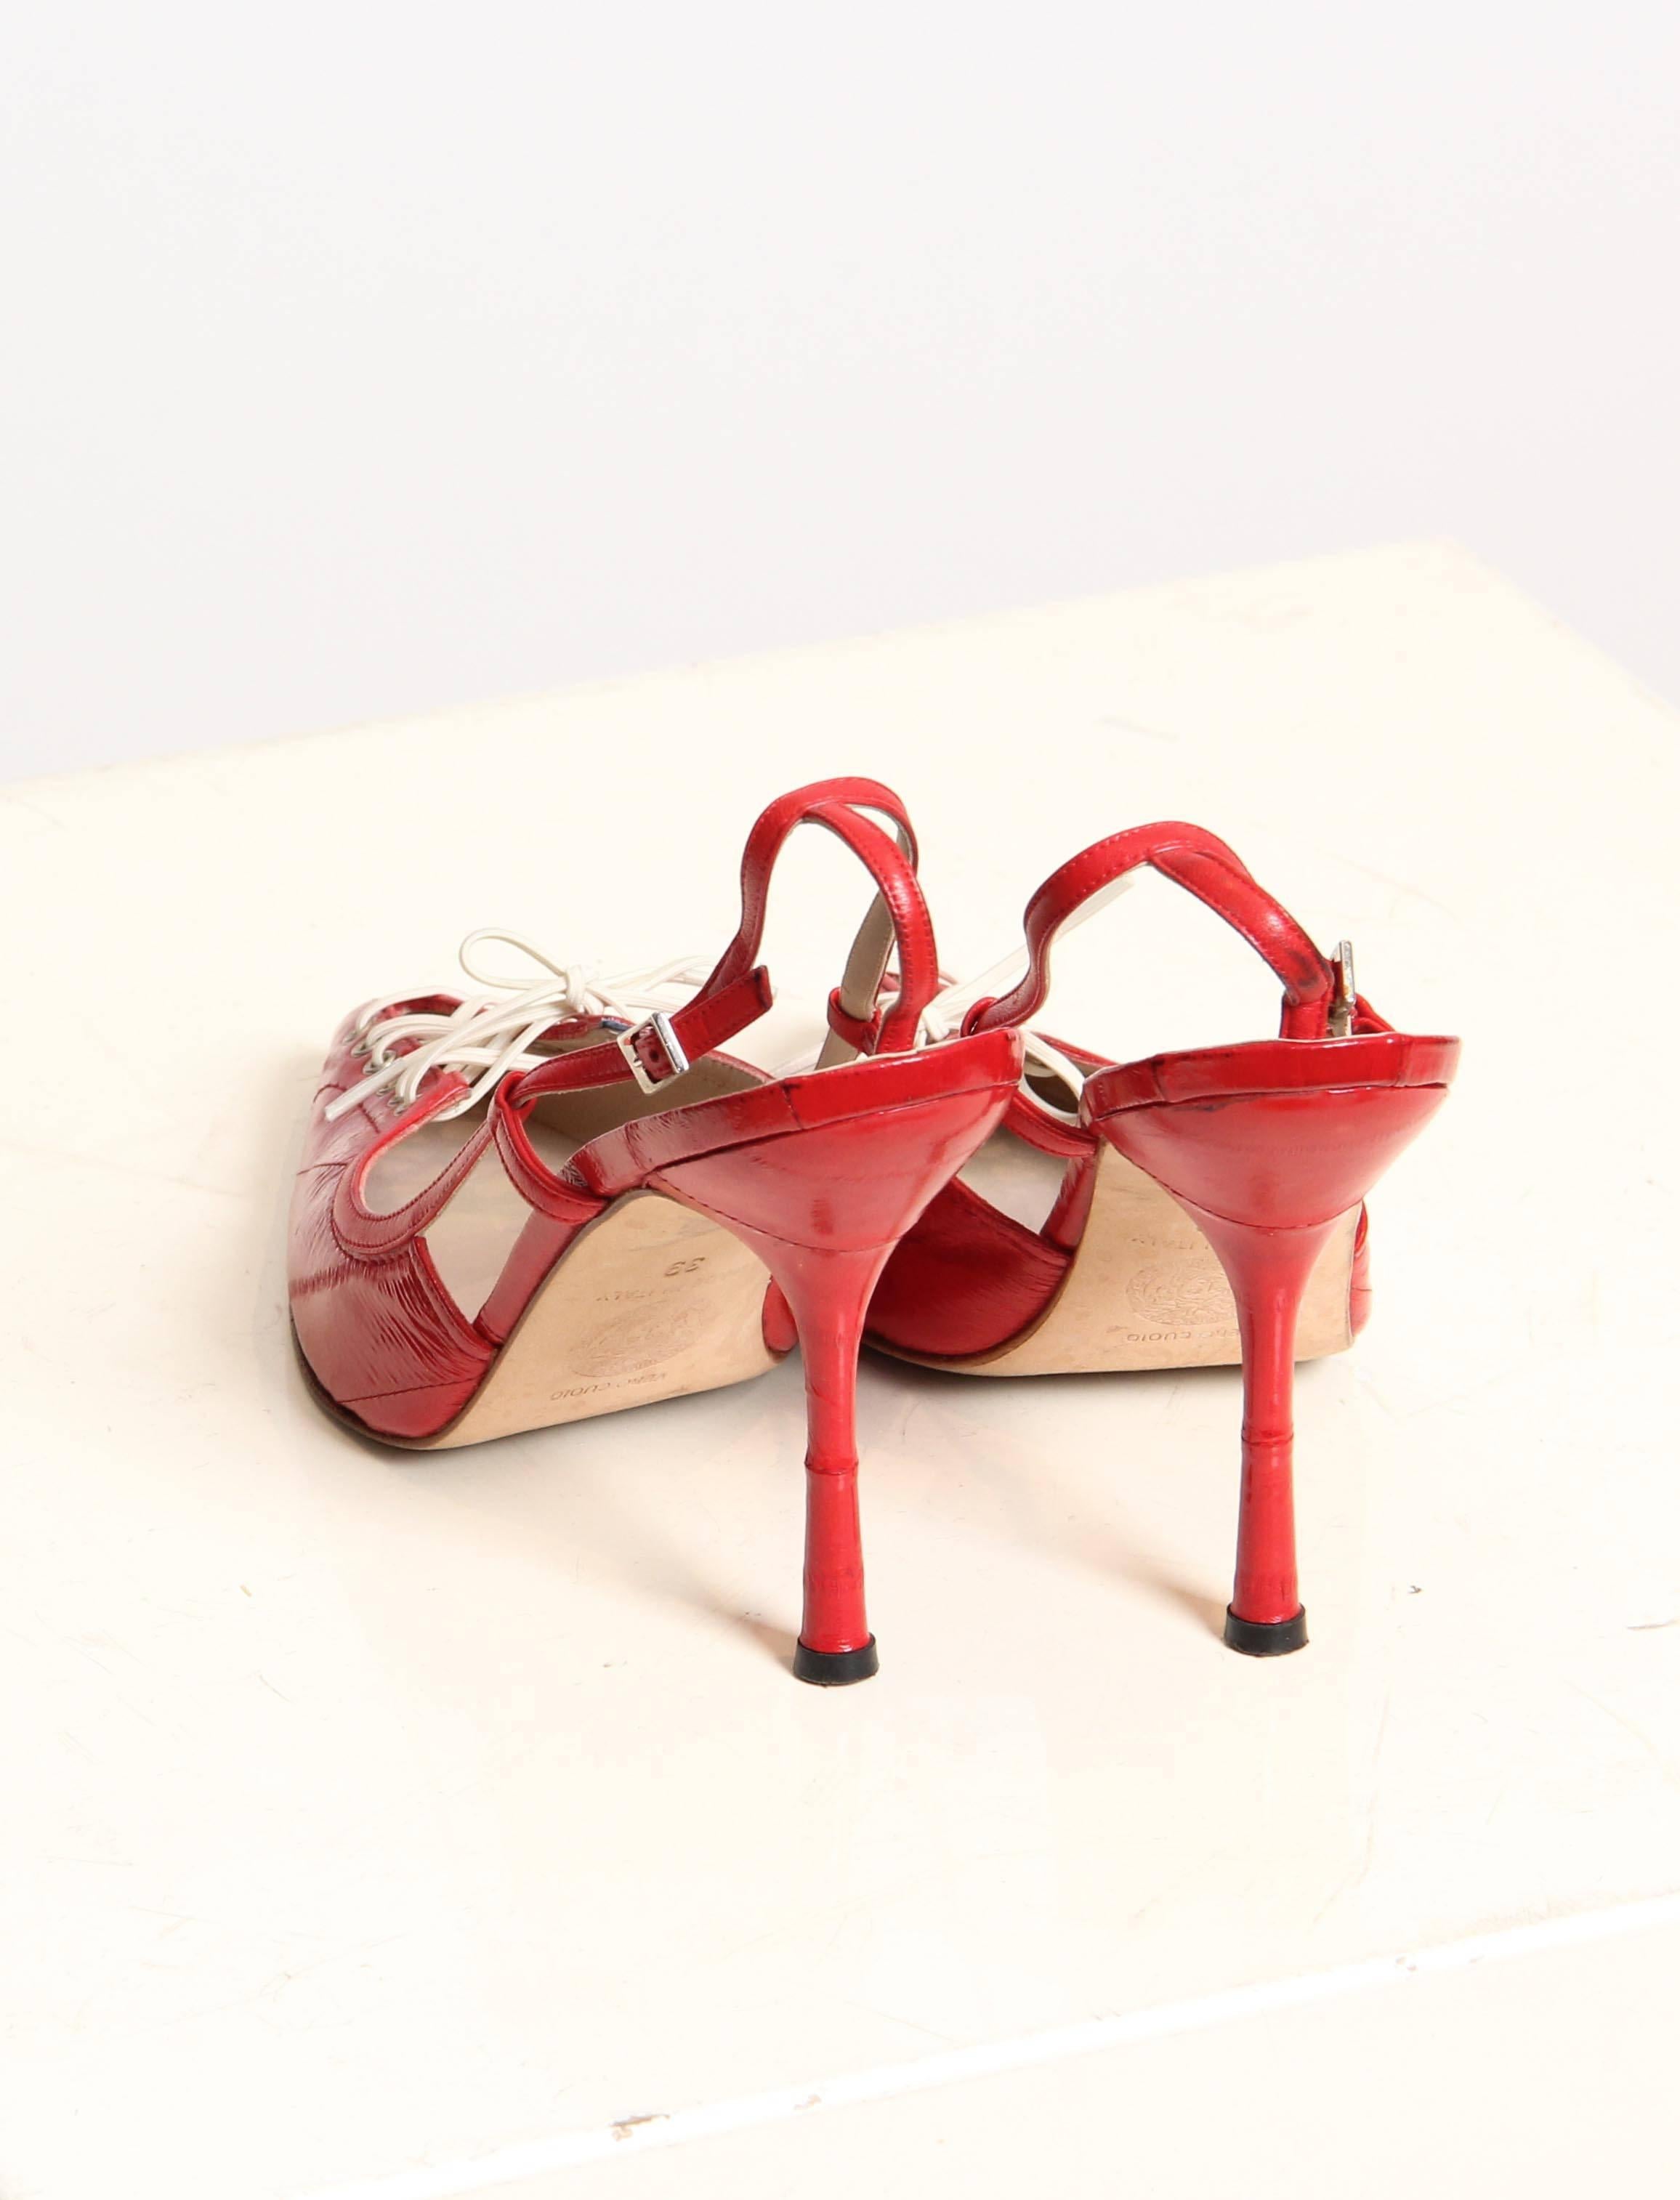 These are a pair of scarlet strappy heels by famed designer Gianni Versace. Made of a supple red eel leather, their pointed toes are laced up like a running shoe for a flirty peek and a charming sporty reference. The toe portion is seamed in a